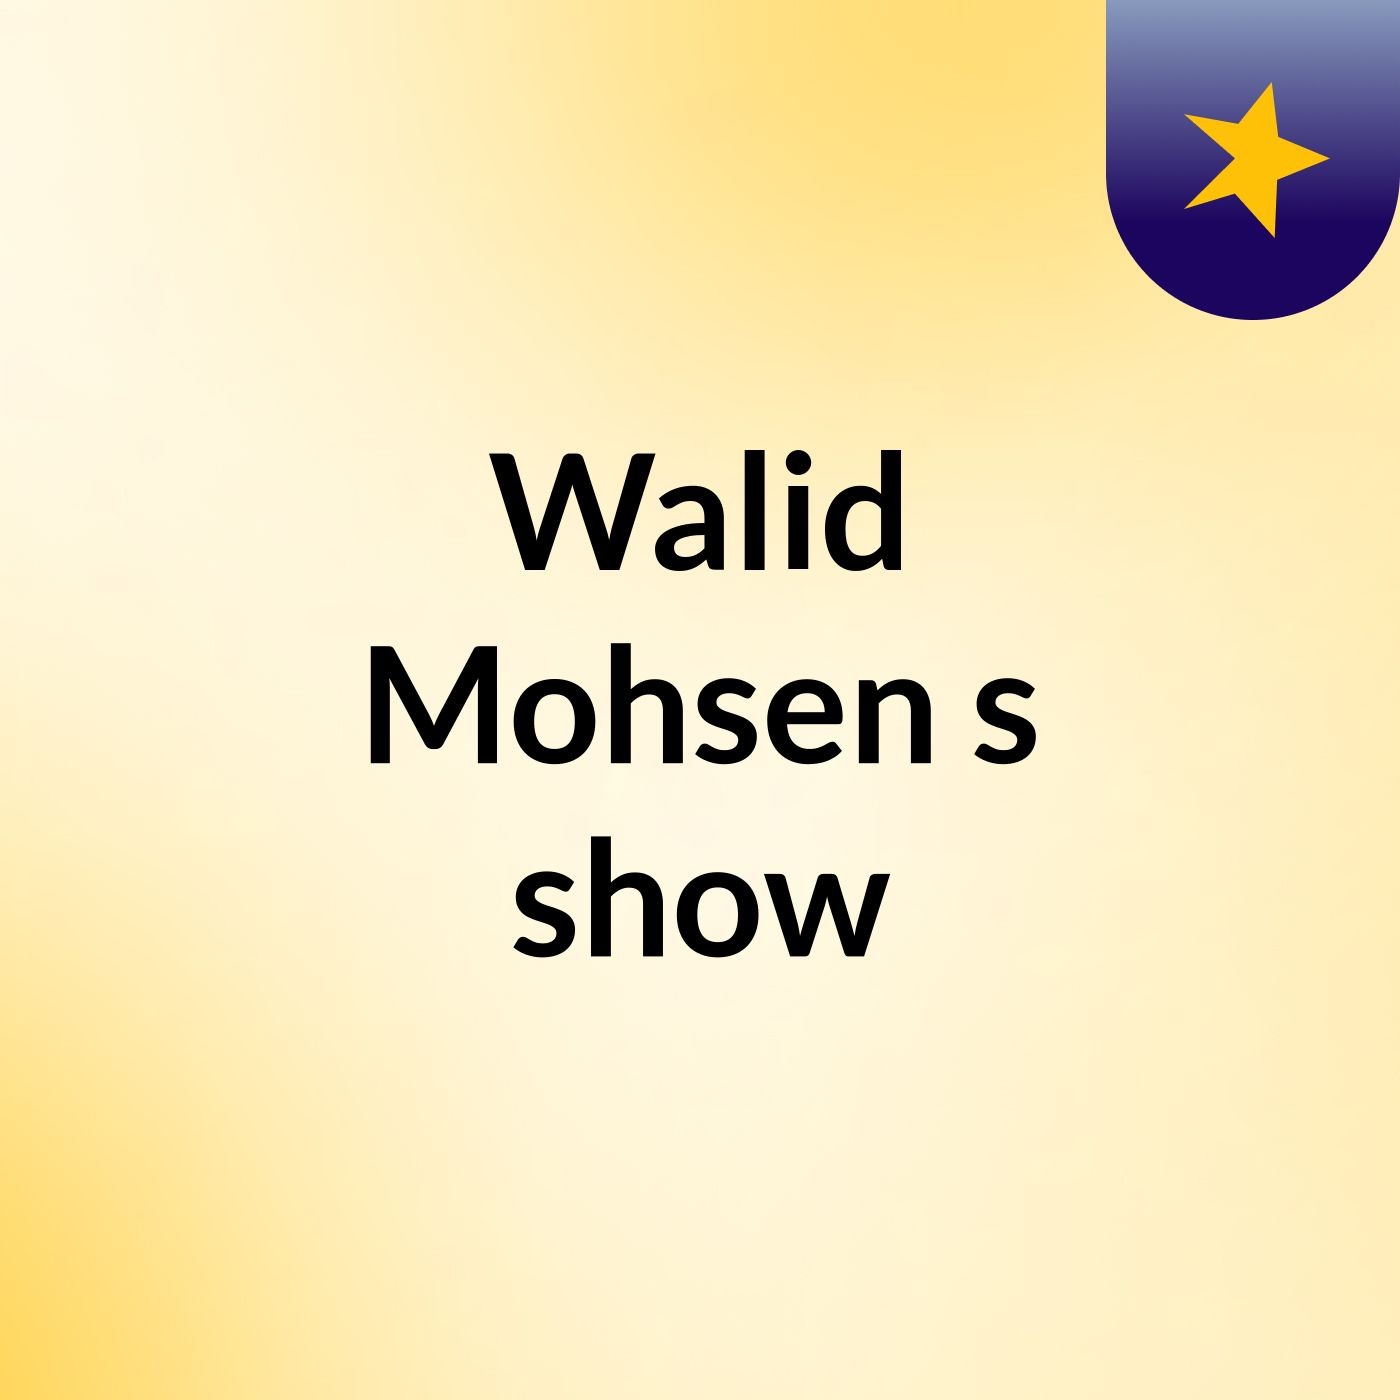 Walid Mohsen's show